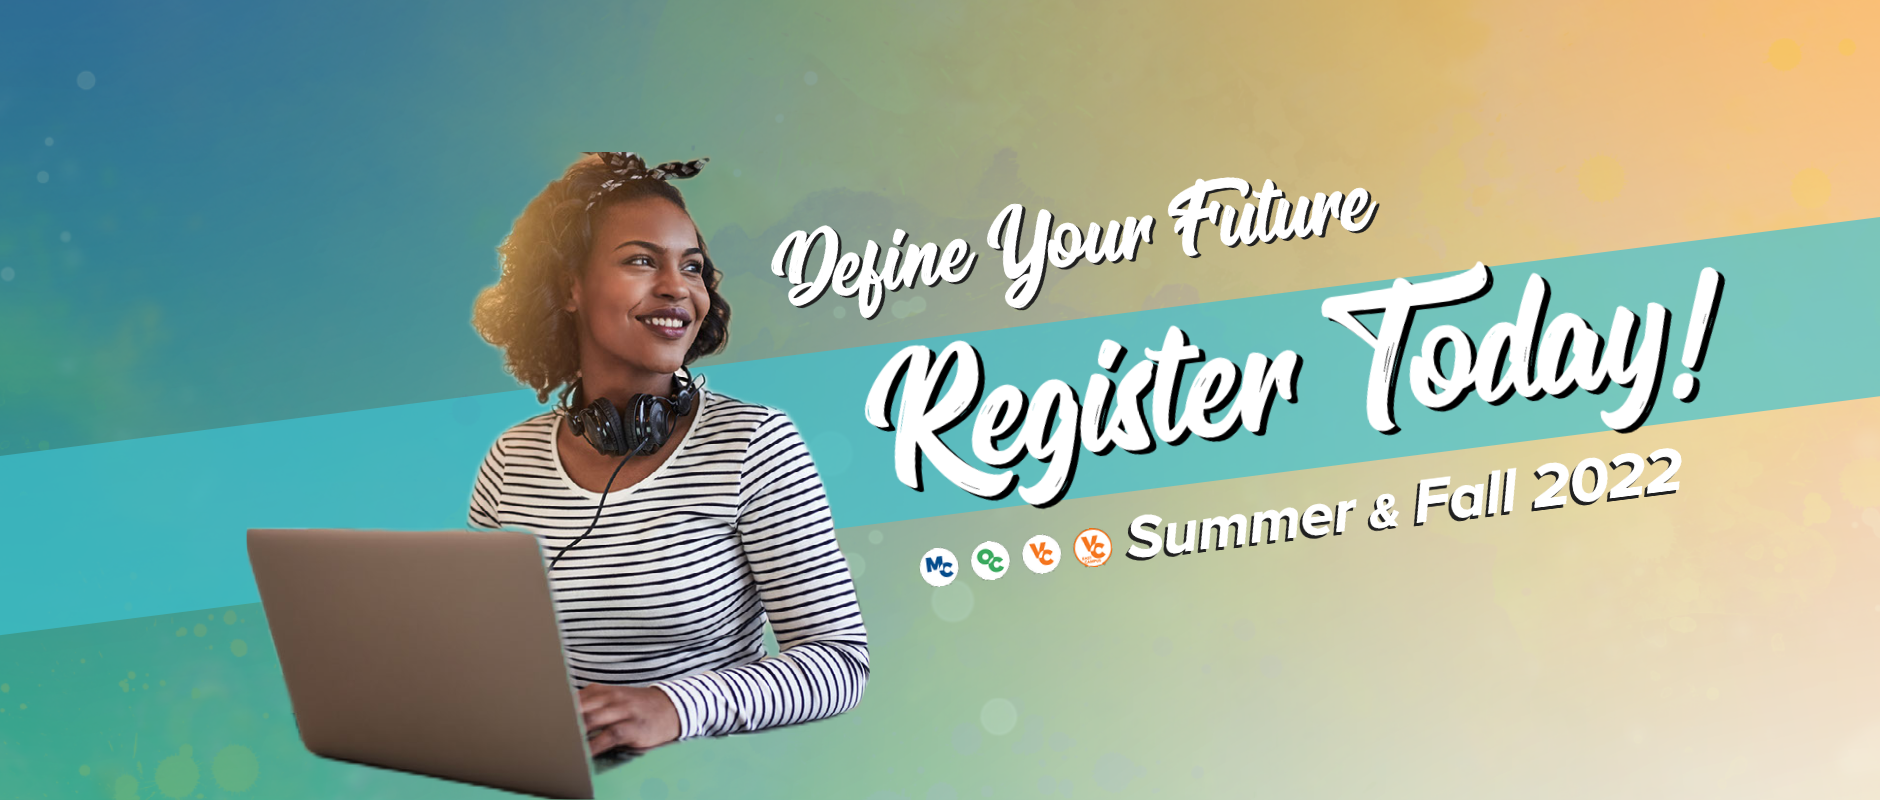 Define Your Future. Register Today! Summer & Fall 2022